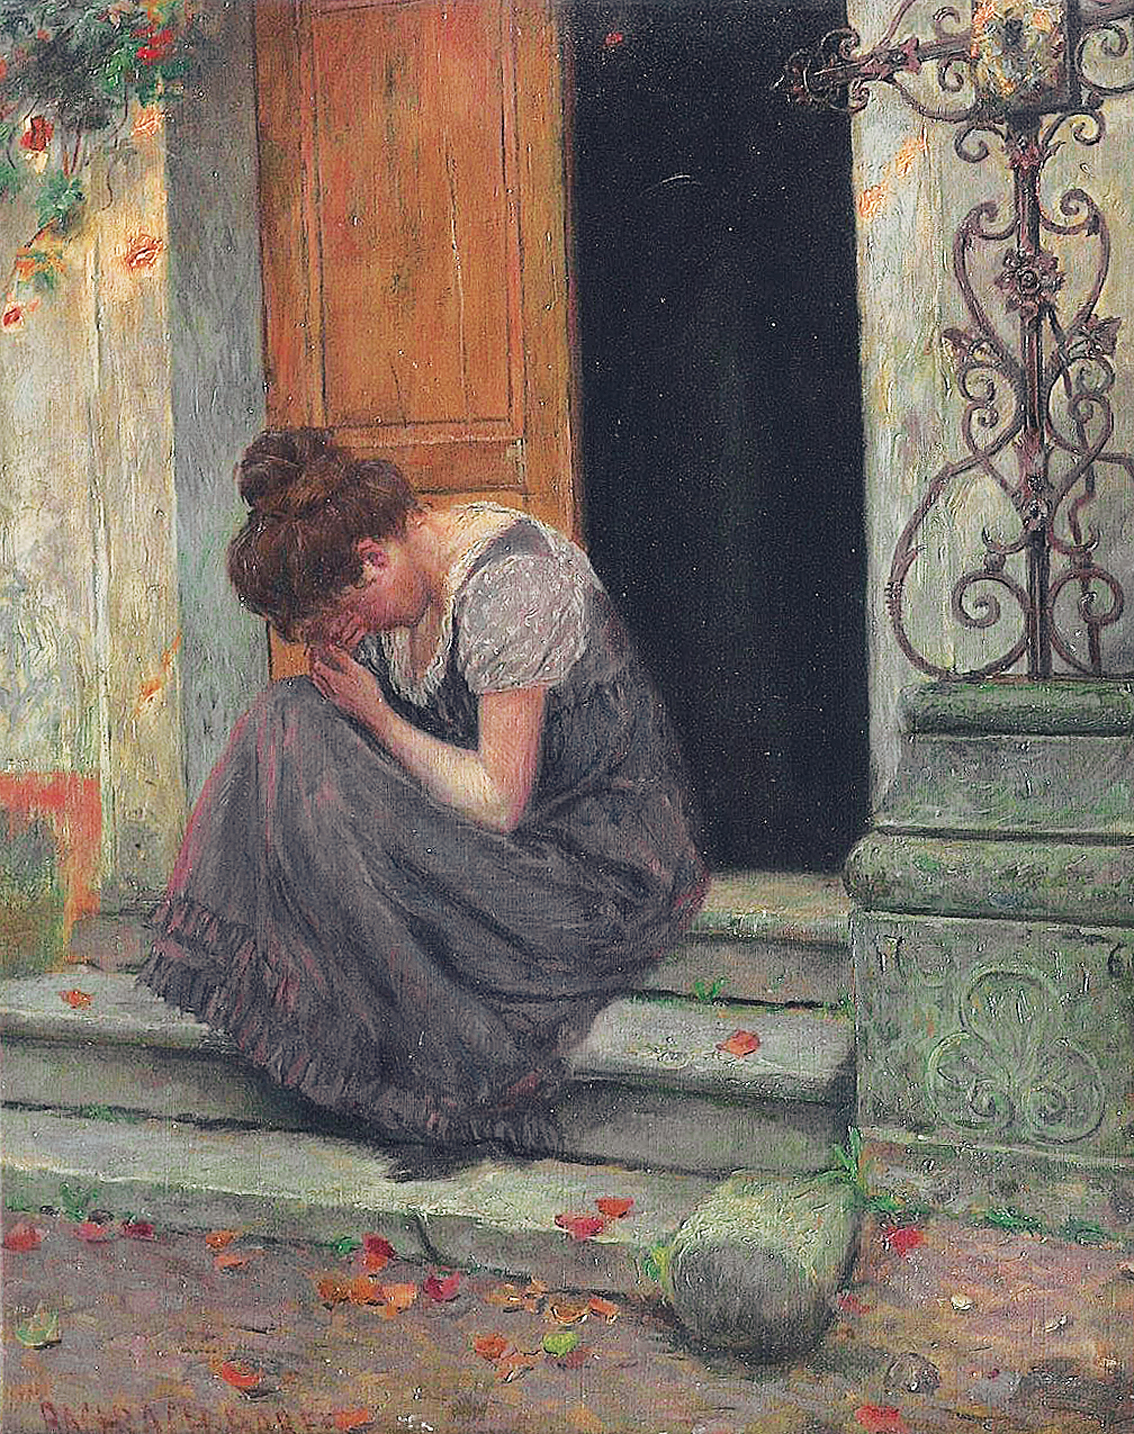 A weeping girl on the stairs